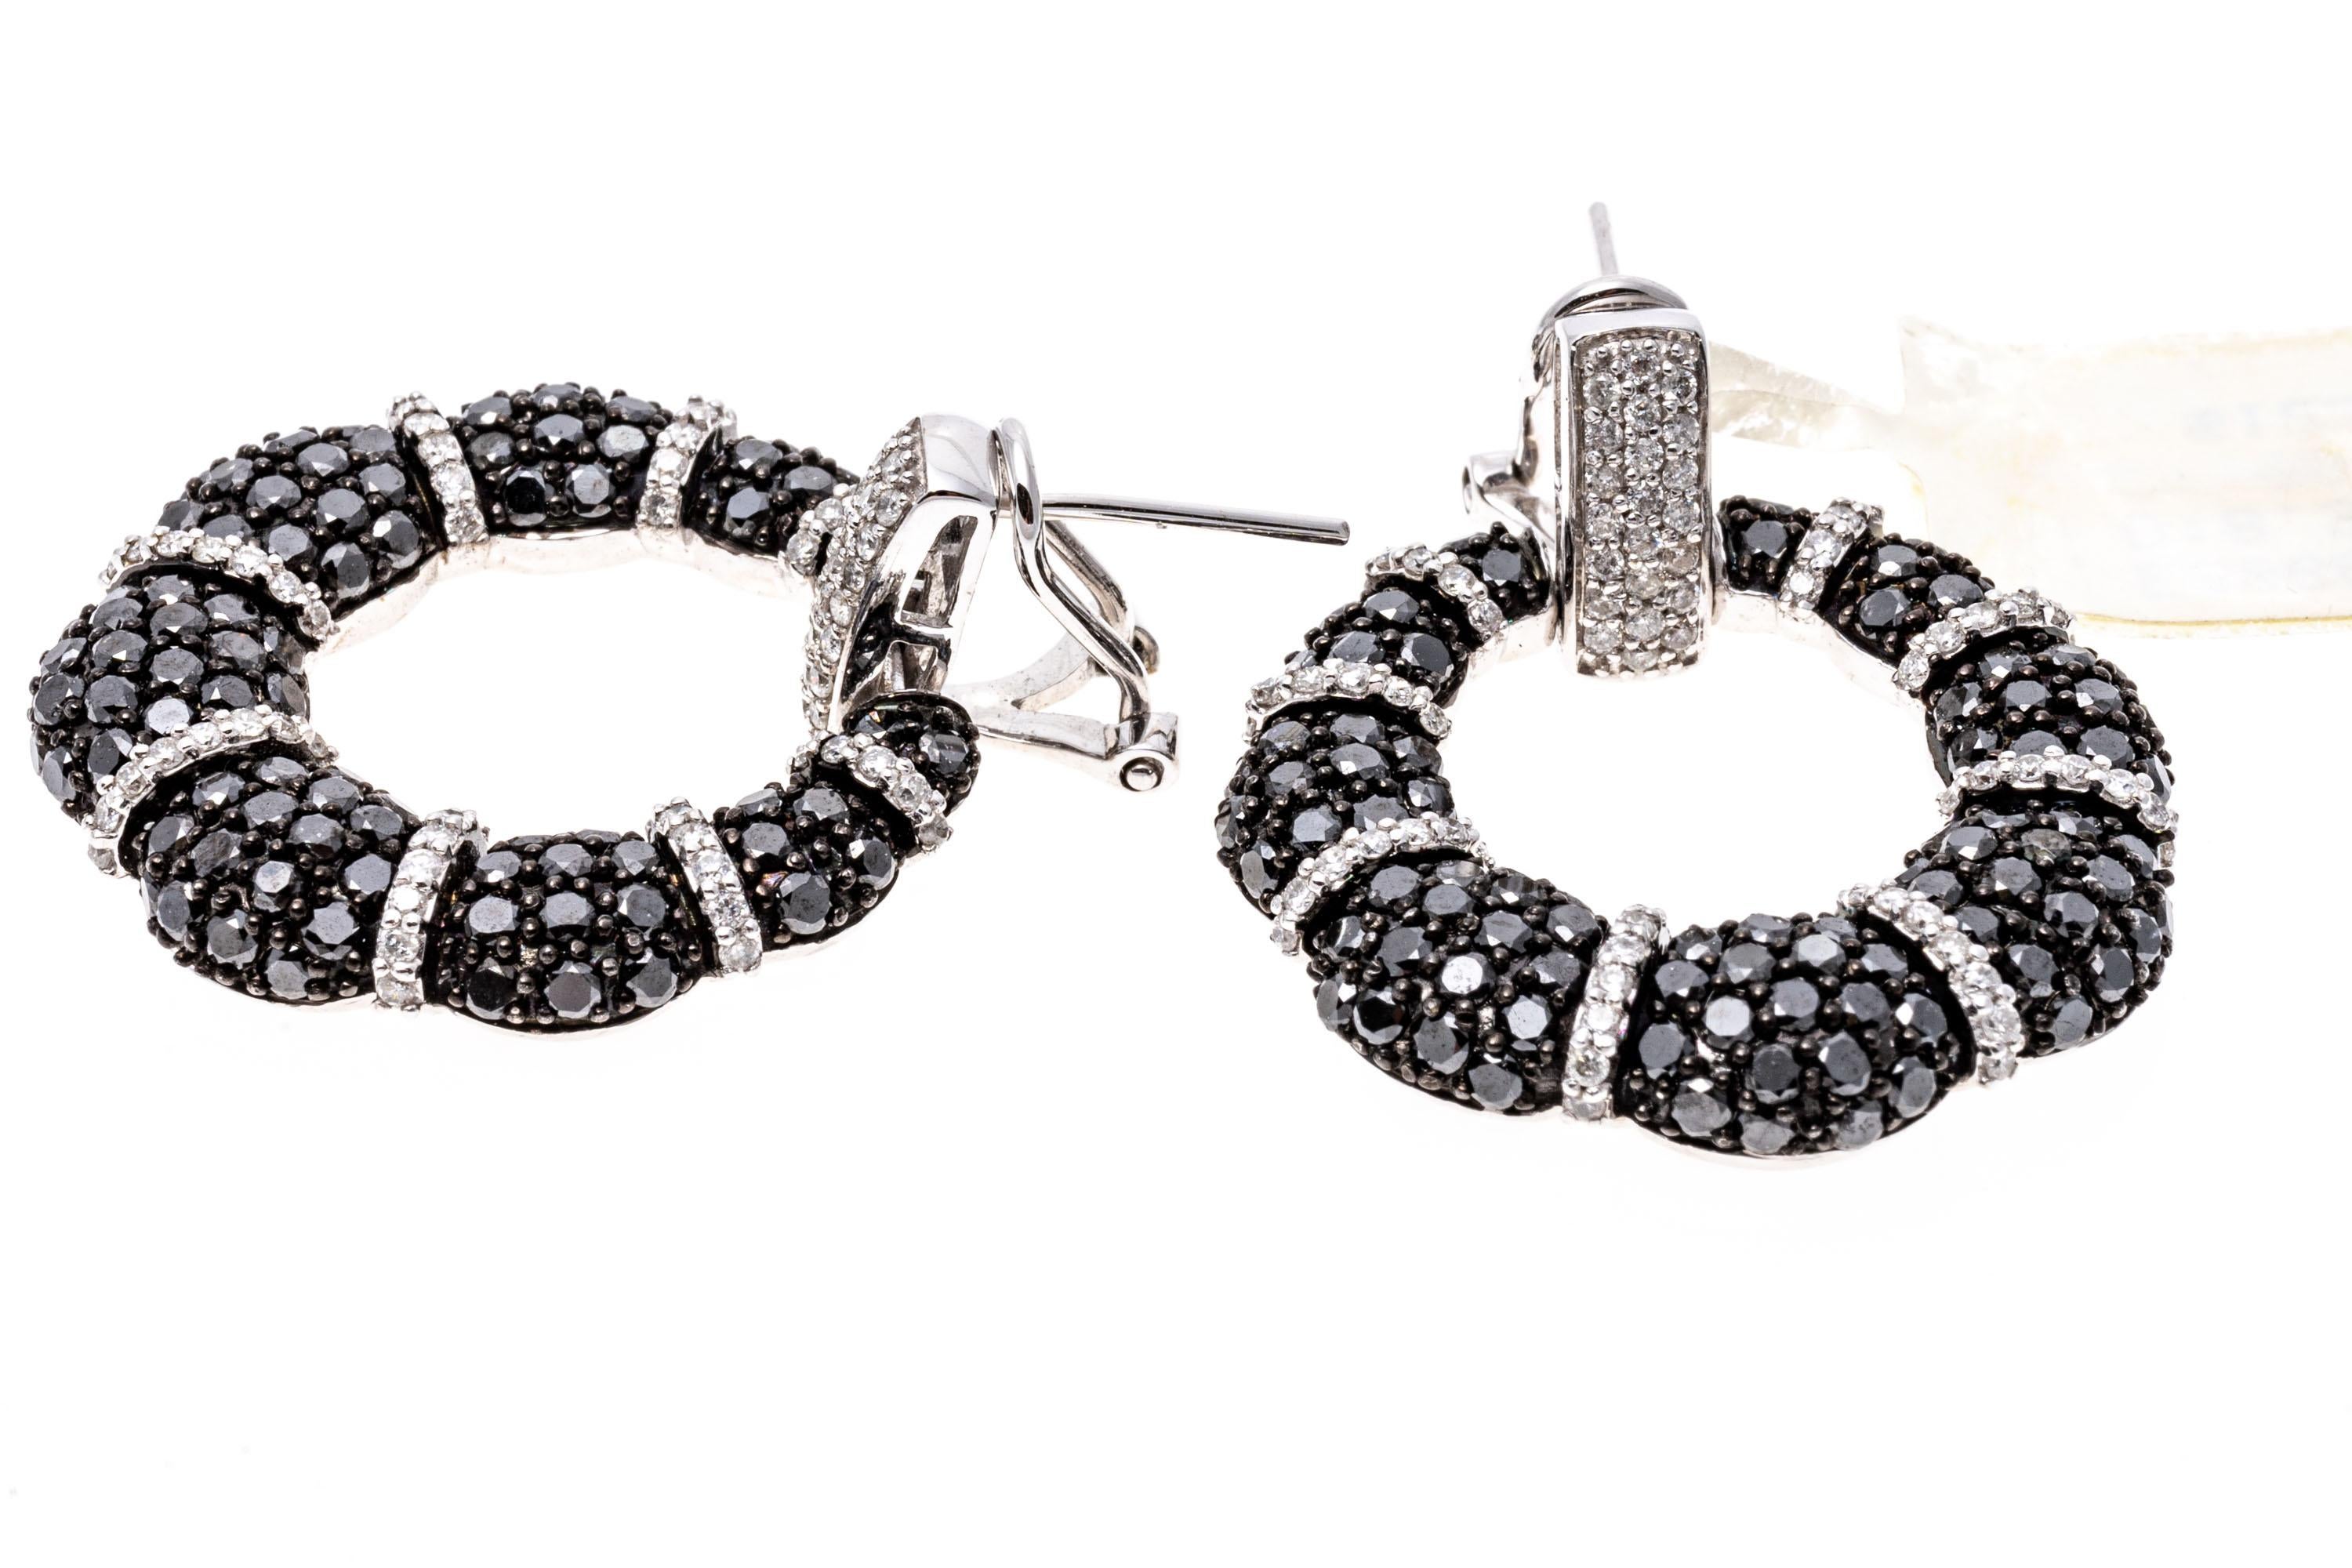 14k white gold black and white diamond earrings. These striking earrings are a doorknocker style, with a wreath-like bottom, and are pave set with round black diamonds alternating with a white round diamond trim, 8.35 TCW. The earring have posts